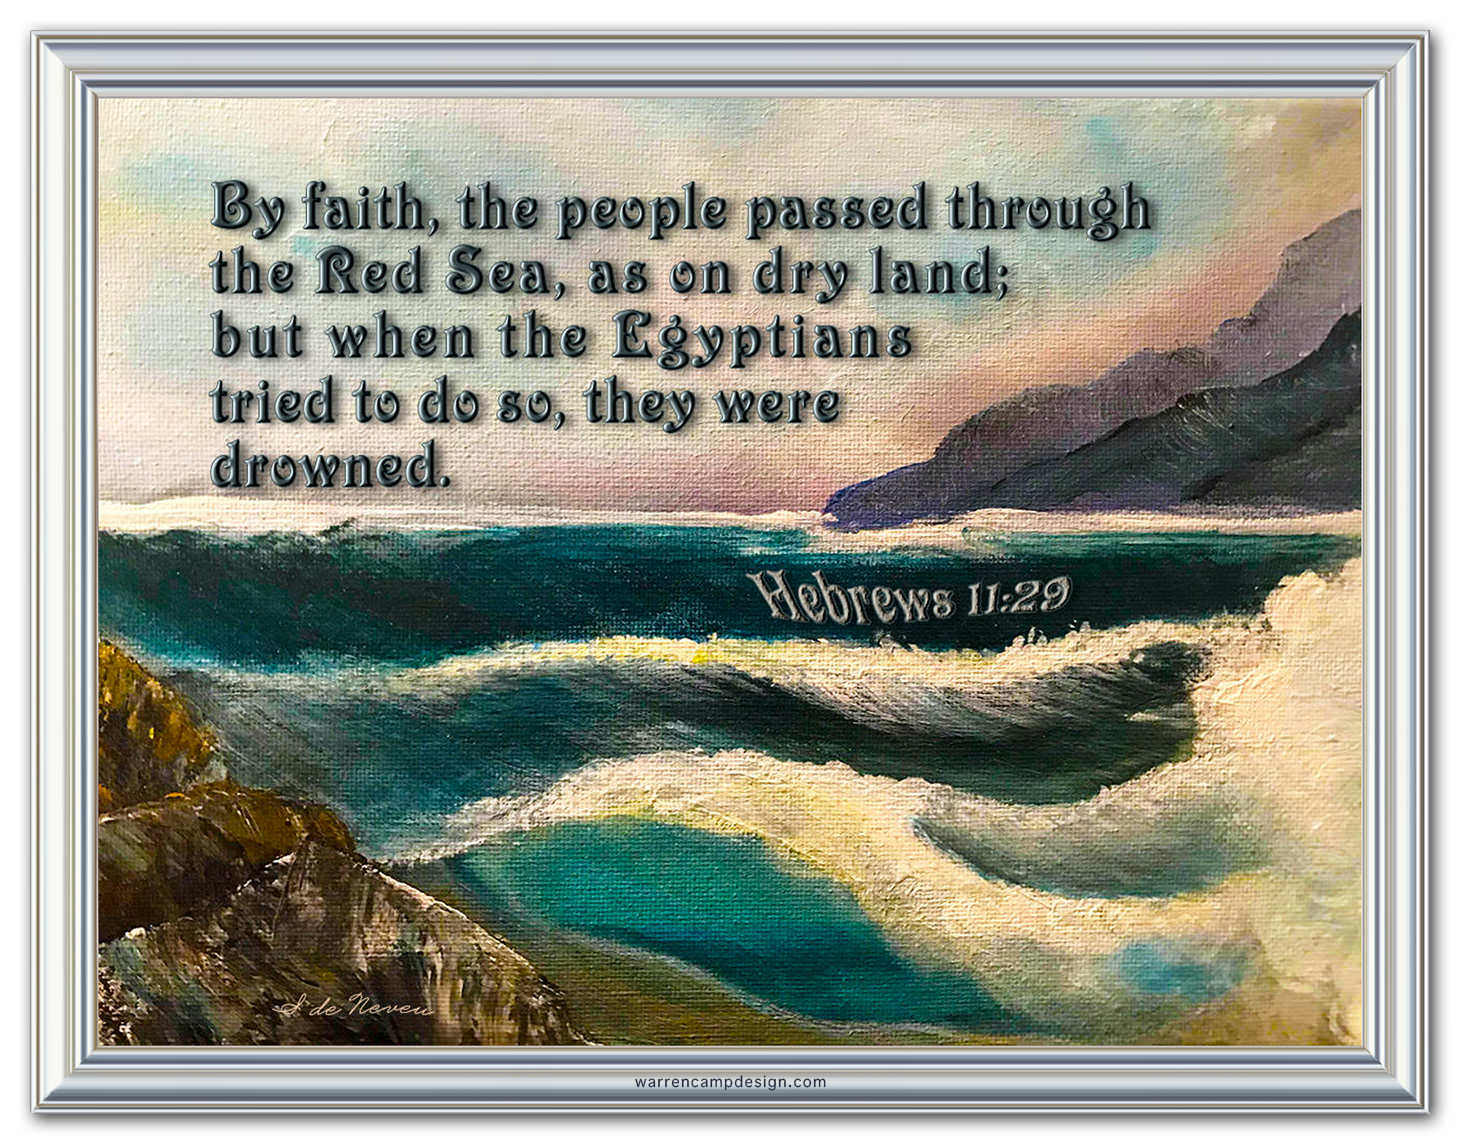 Scripture picture of Hebrews 11:29, emphasizing the Israelites' faith at the Red Sea